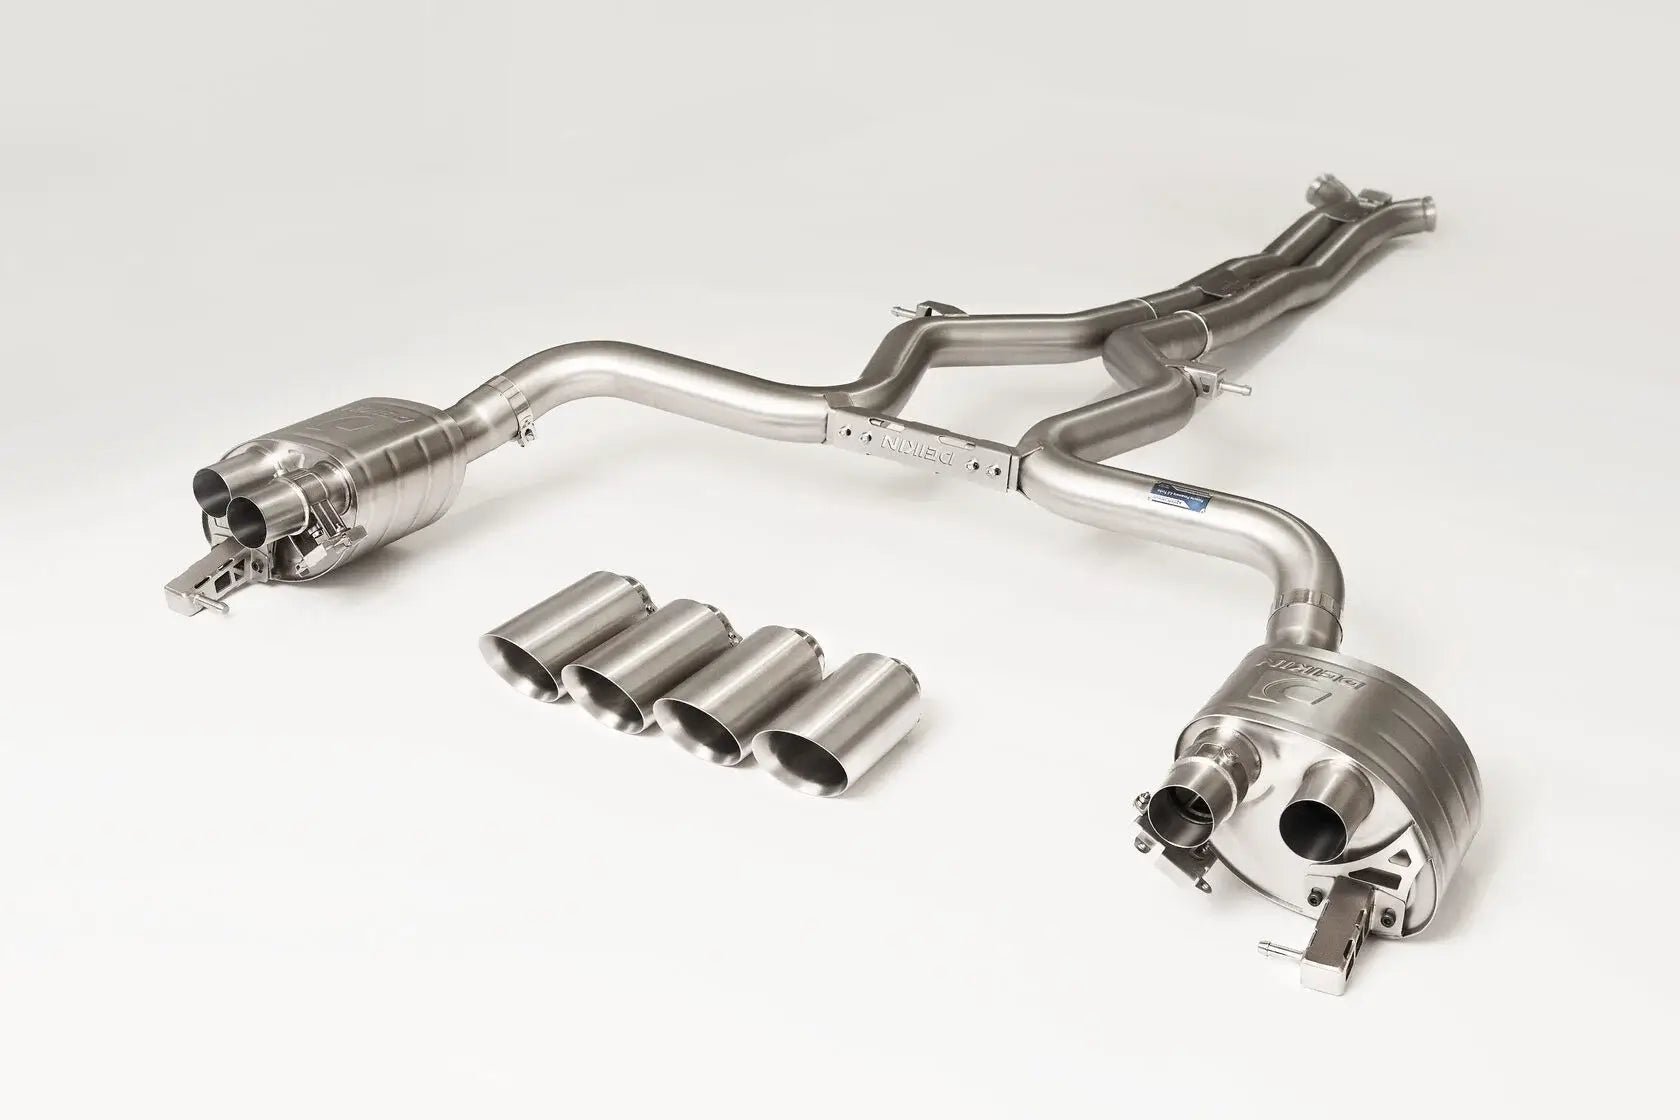 DEIKIN 10-PO.PAN.T/GTS.971/ES-SS-04 Exhaust system Stainless steel for Porsche Panamera Turbo/GTS (971) complete with downpipes HeatShield Burnt Titanium Photo-1 